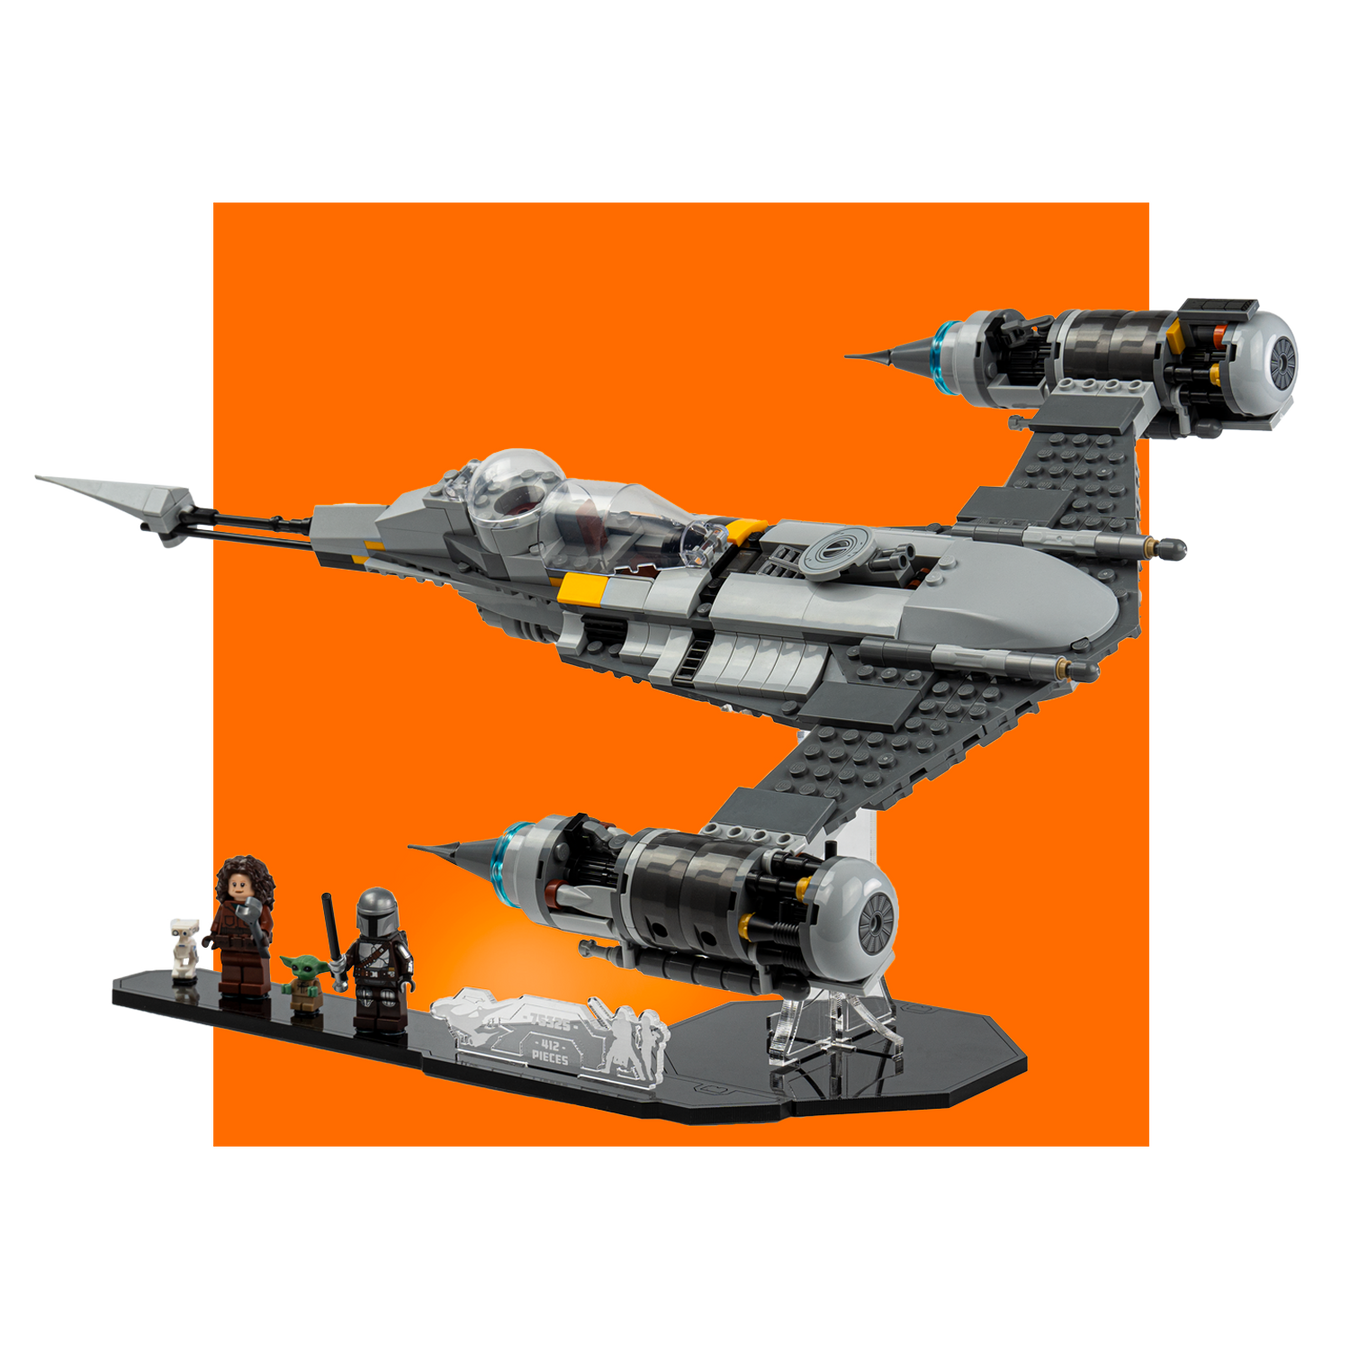 Display stands for LEGO® Star Wars™